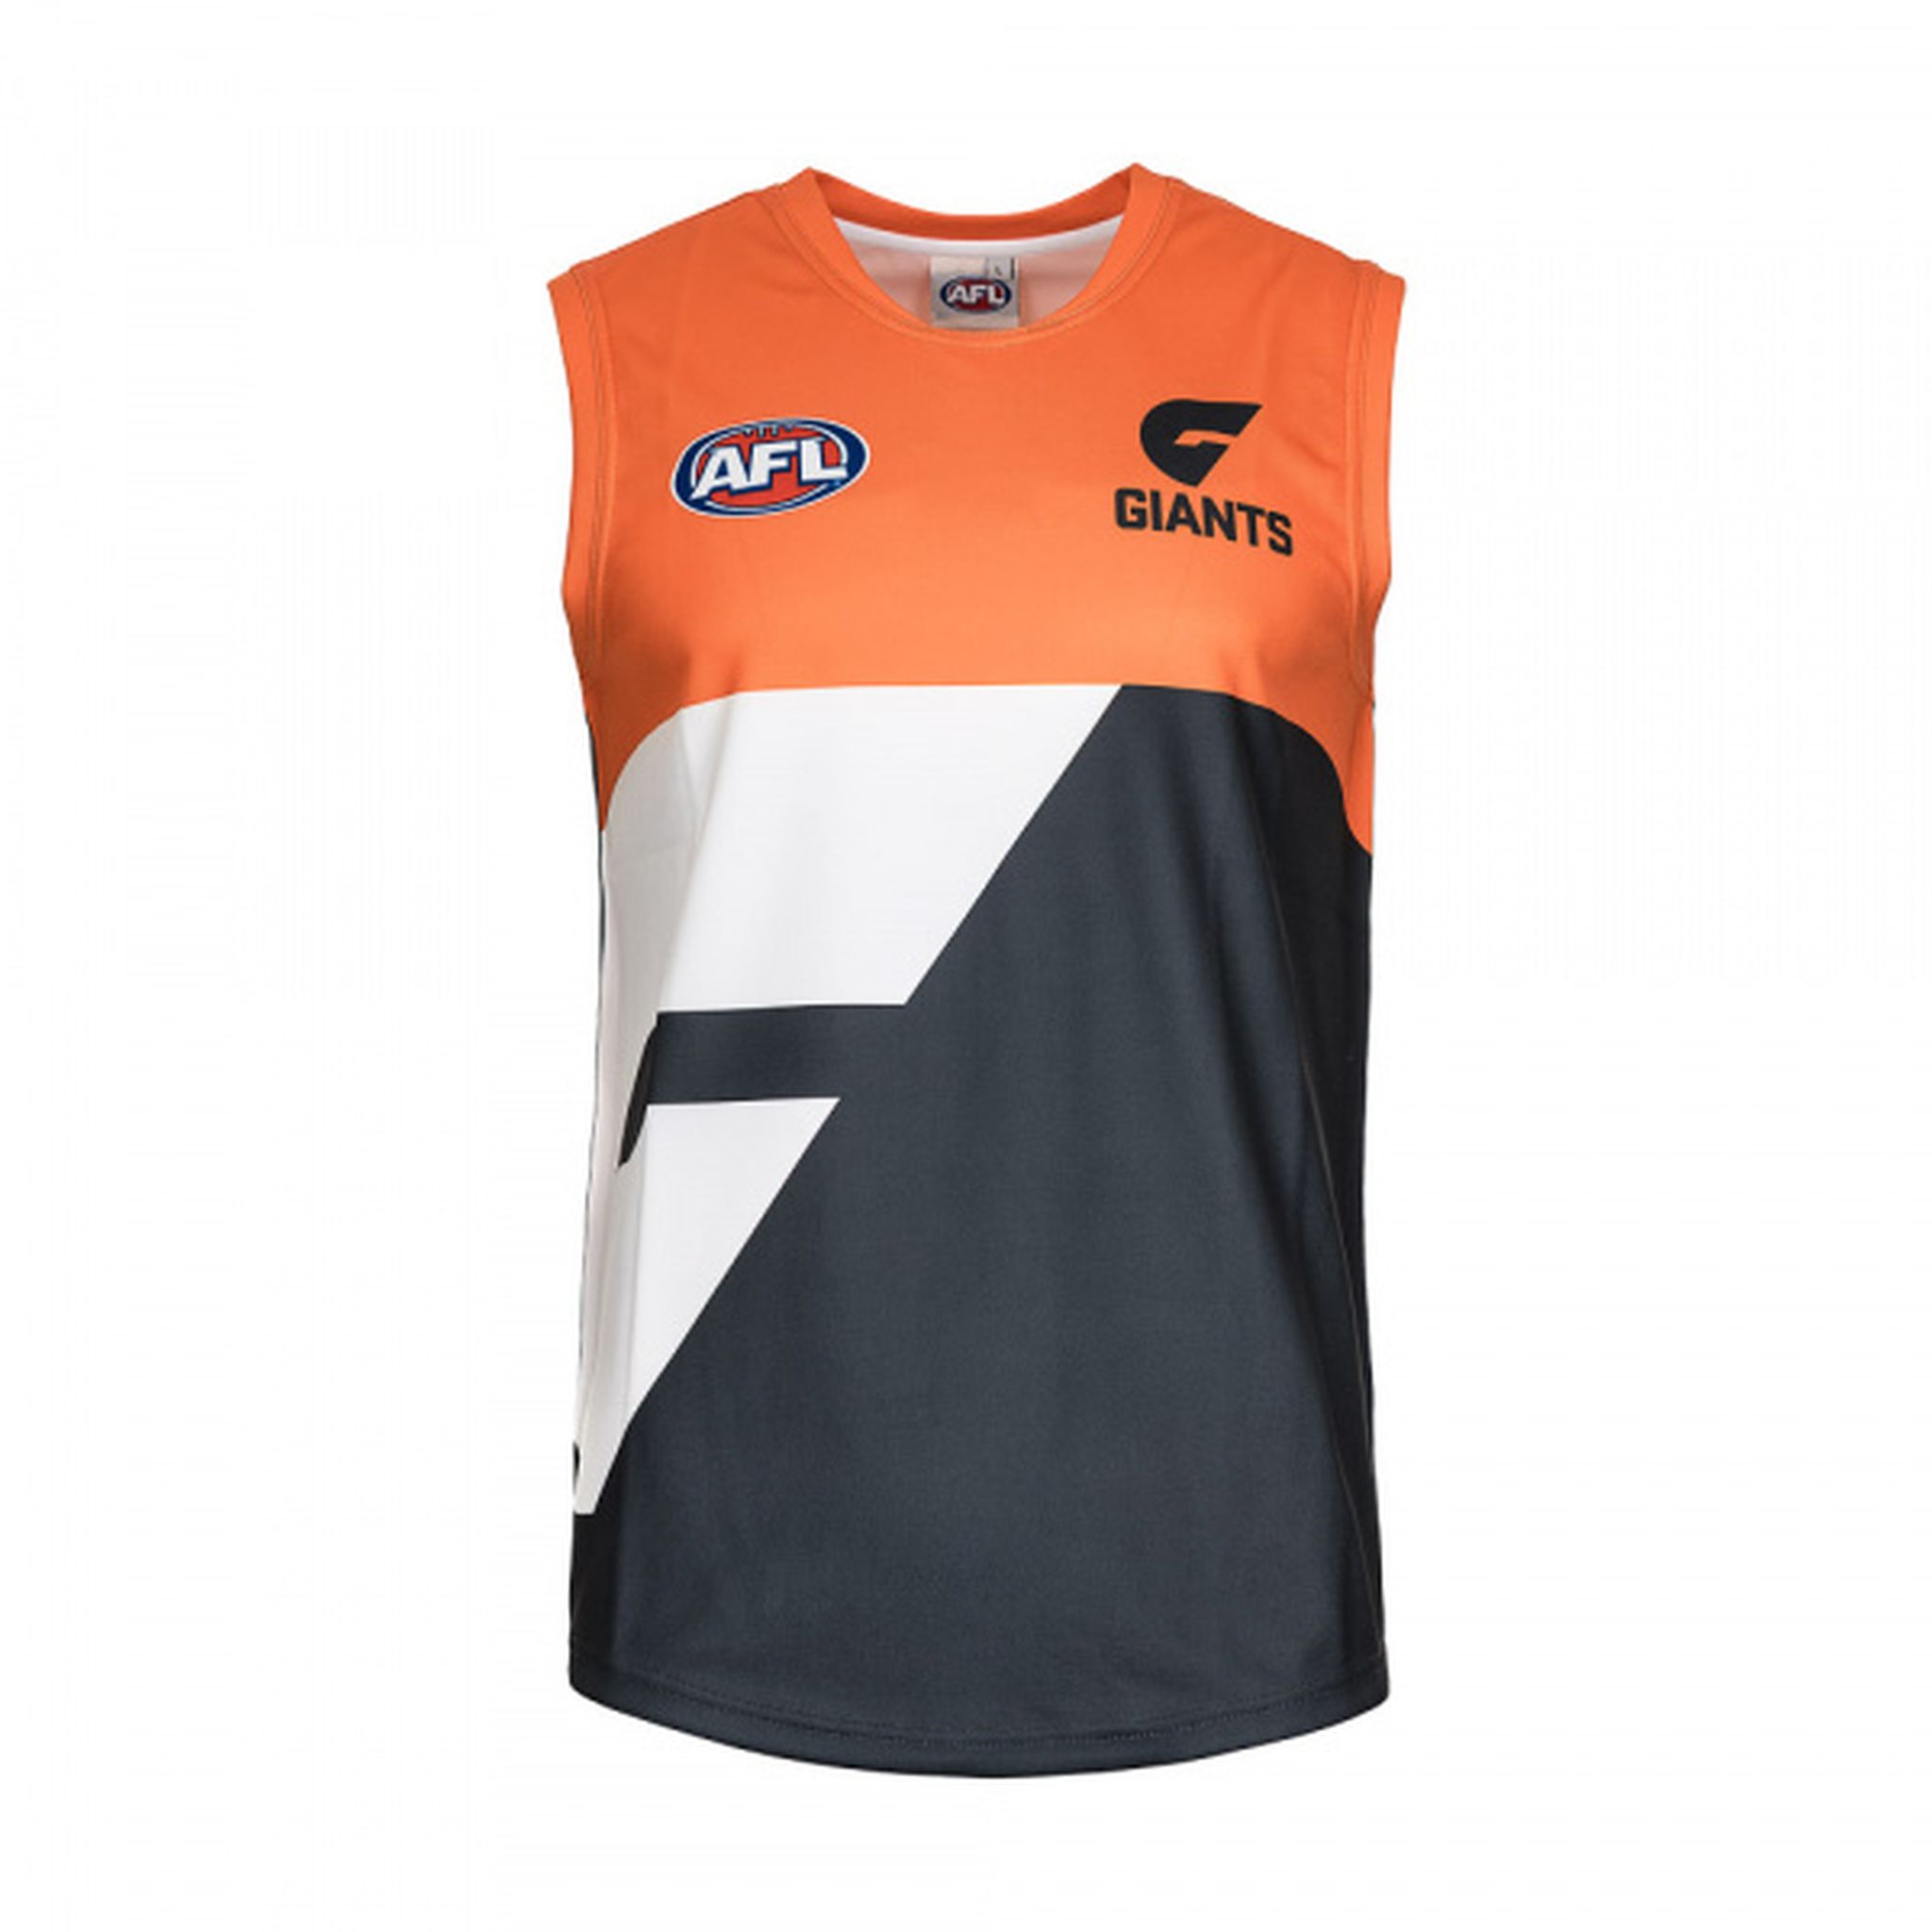 Burley GWS Giants AFL Home Kids Replica Guernsey